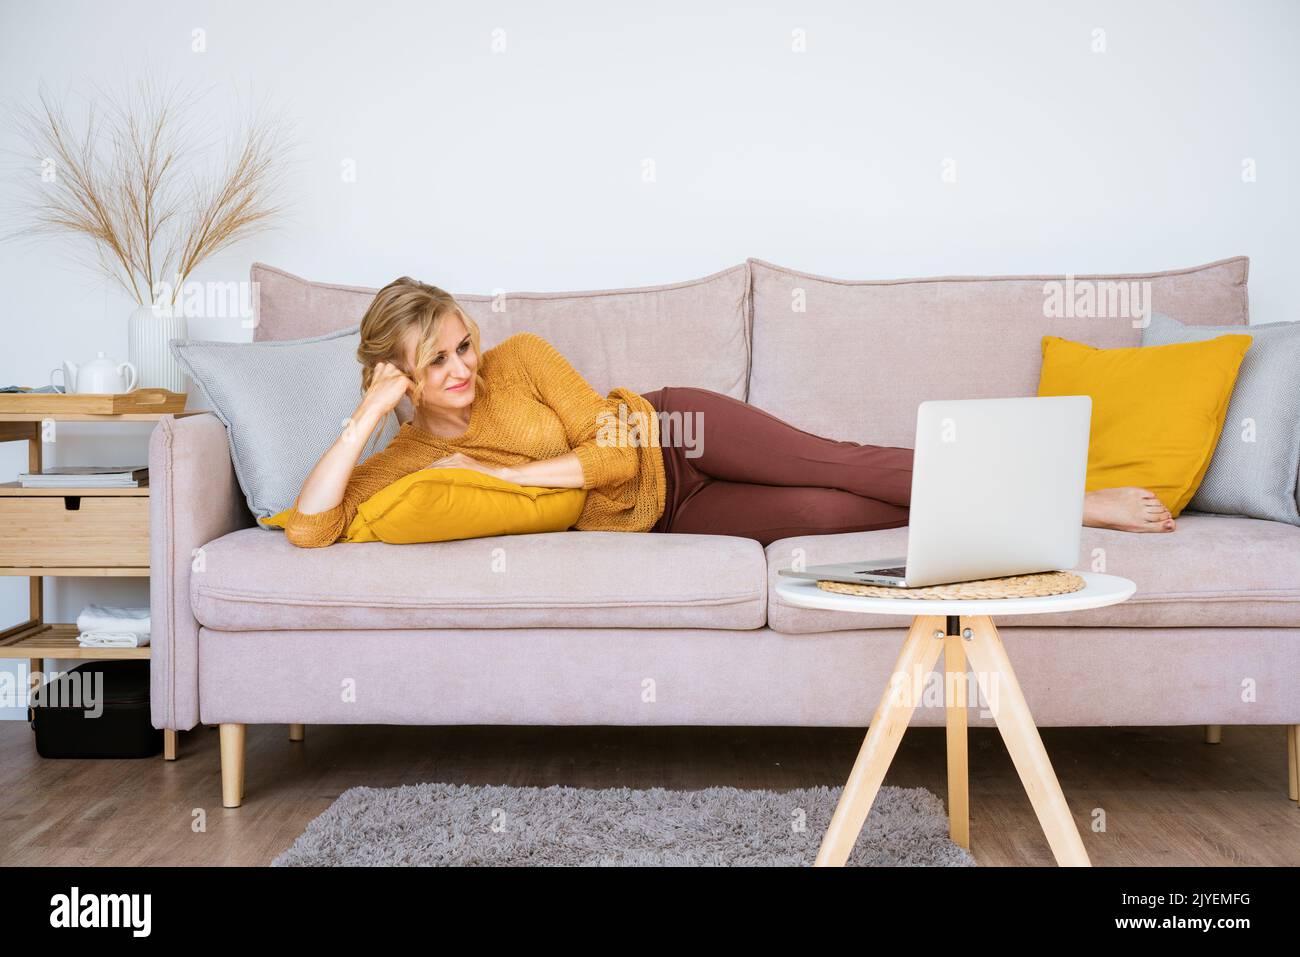 Business freelance woman working on laptops, checking social media, lying on sofa and watching movie while relaxing in living room at home. Lifestyle at home caucasian girl freelancer concept. Stock Photo